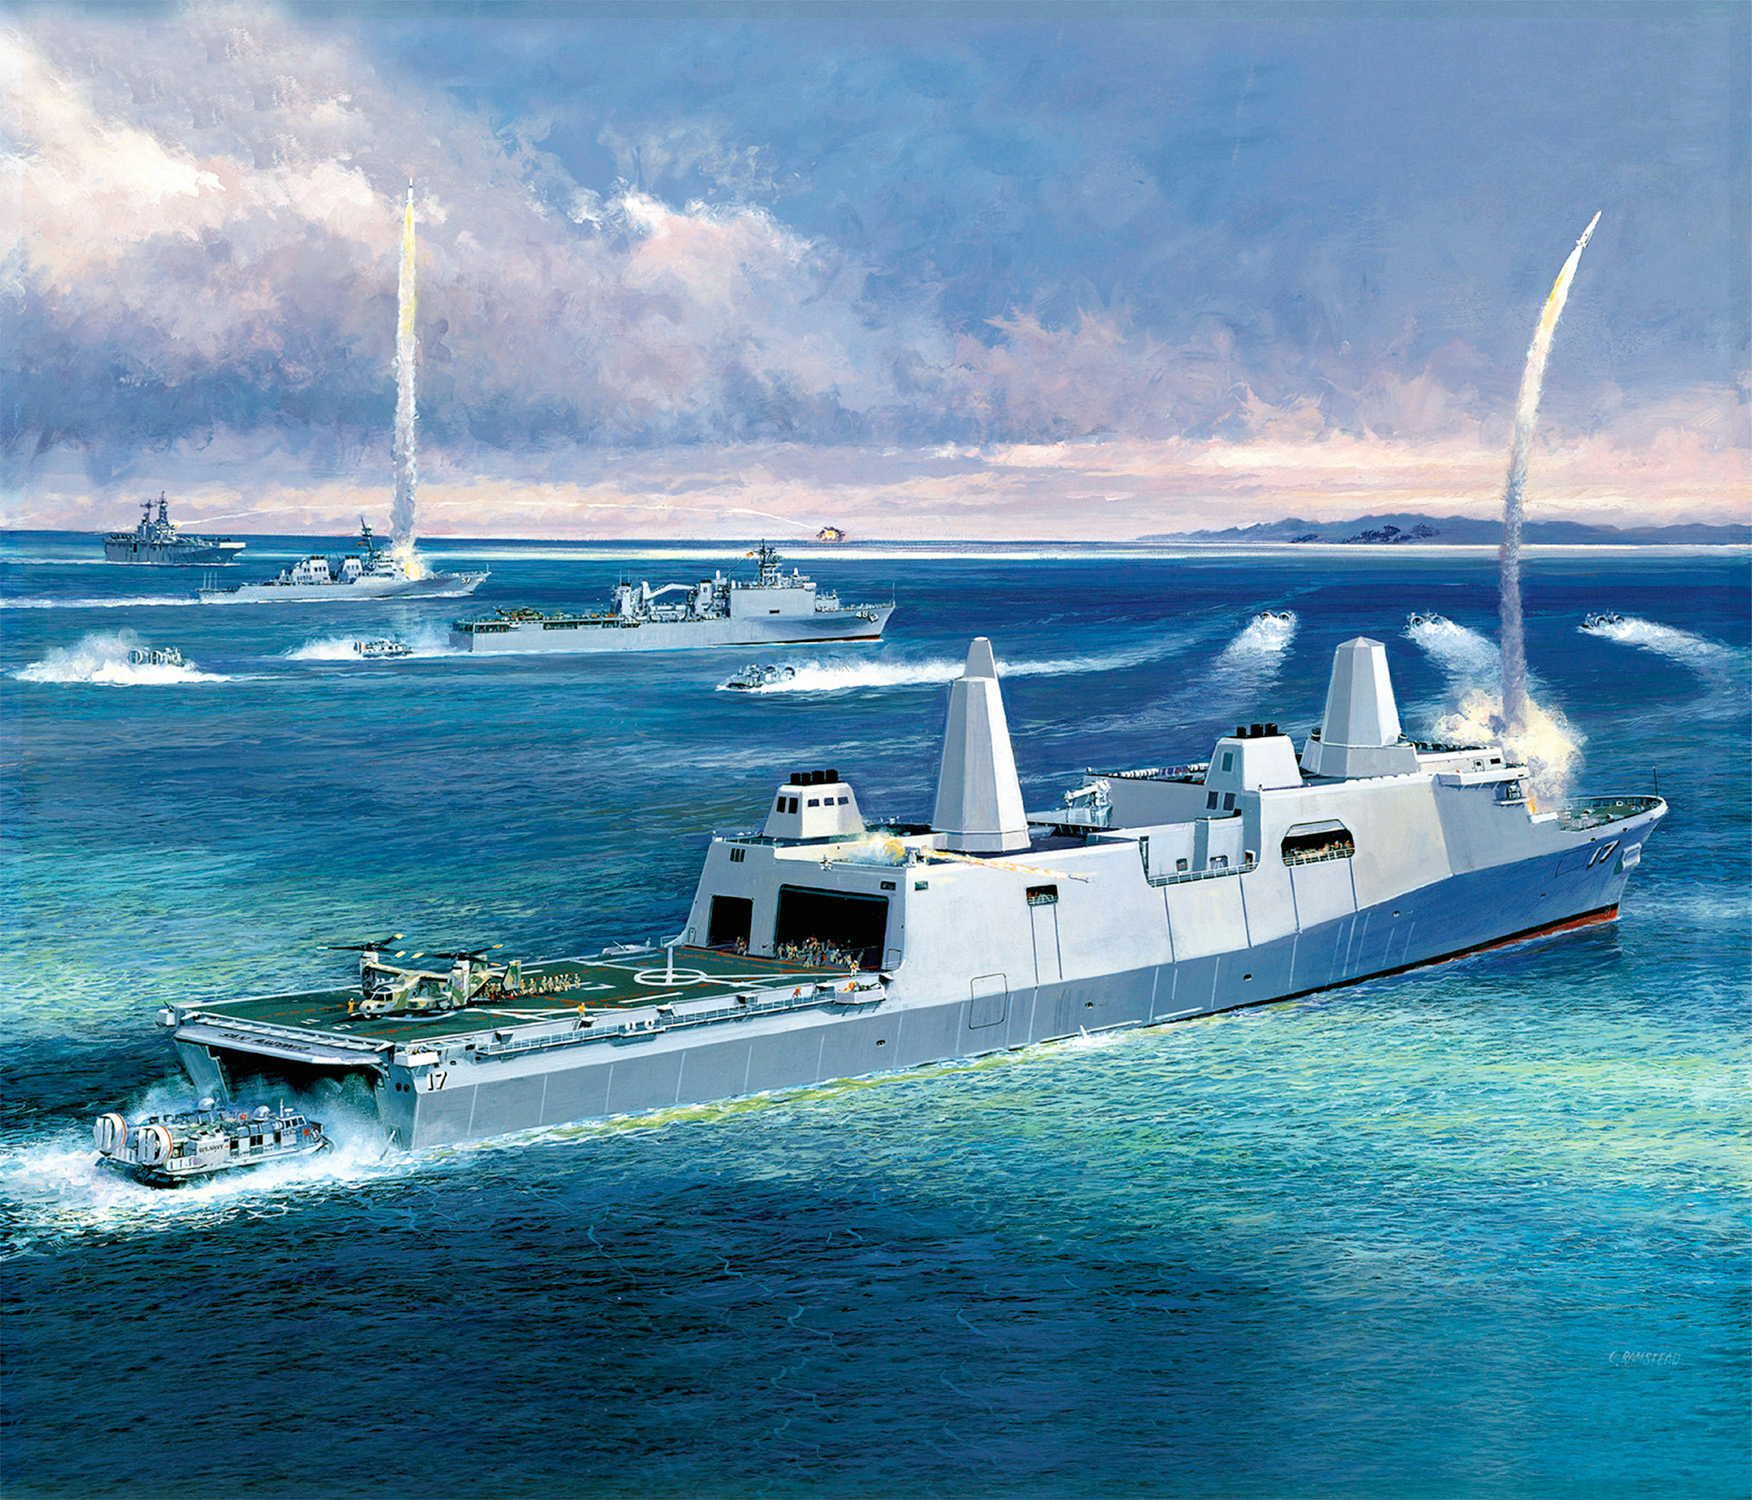 2003 Artist's concept of the San Antonio Class amphibious transport dock ships firing a missile from a vertical launch system in the ship's bow. US Navy Image